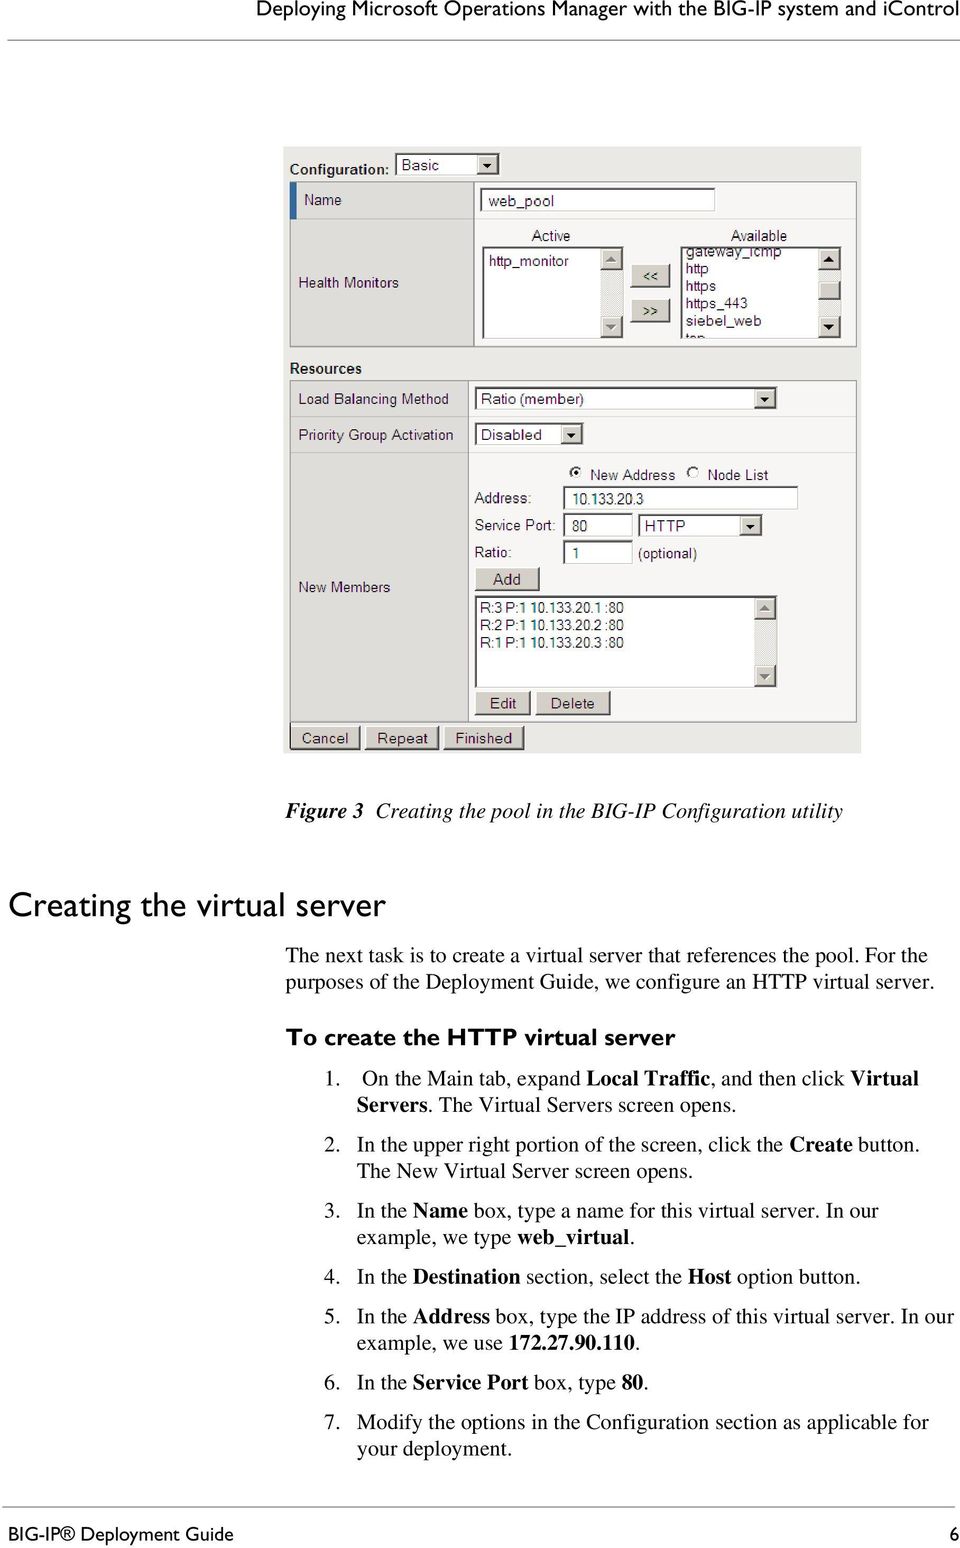 On the Main tab, expand Local Traffic, and then click Virtual Servers. The Virtual Servers screen opens. 2. In the upper right portion of the screen, click the Create button.